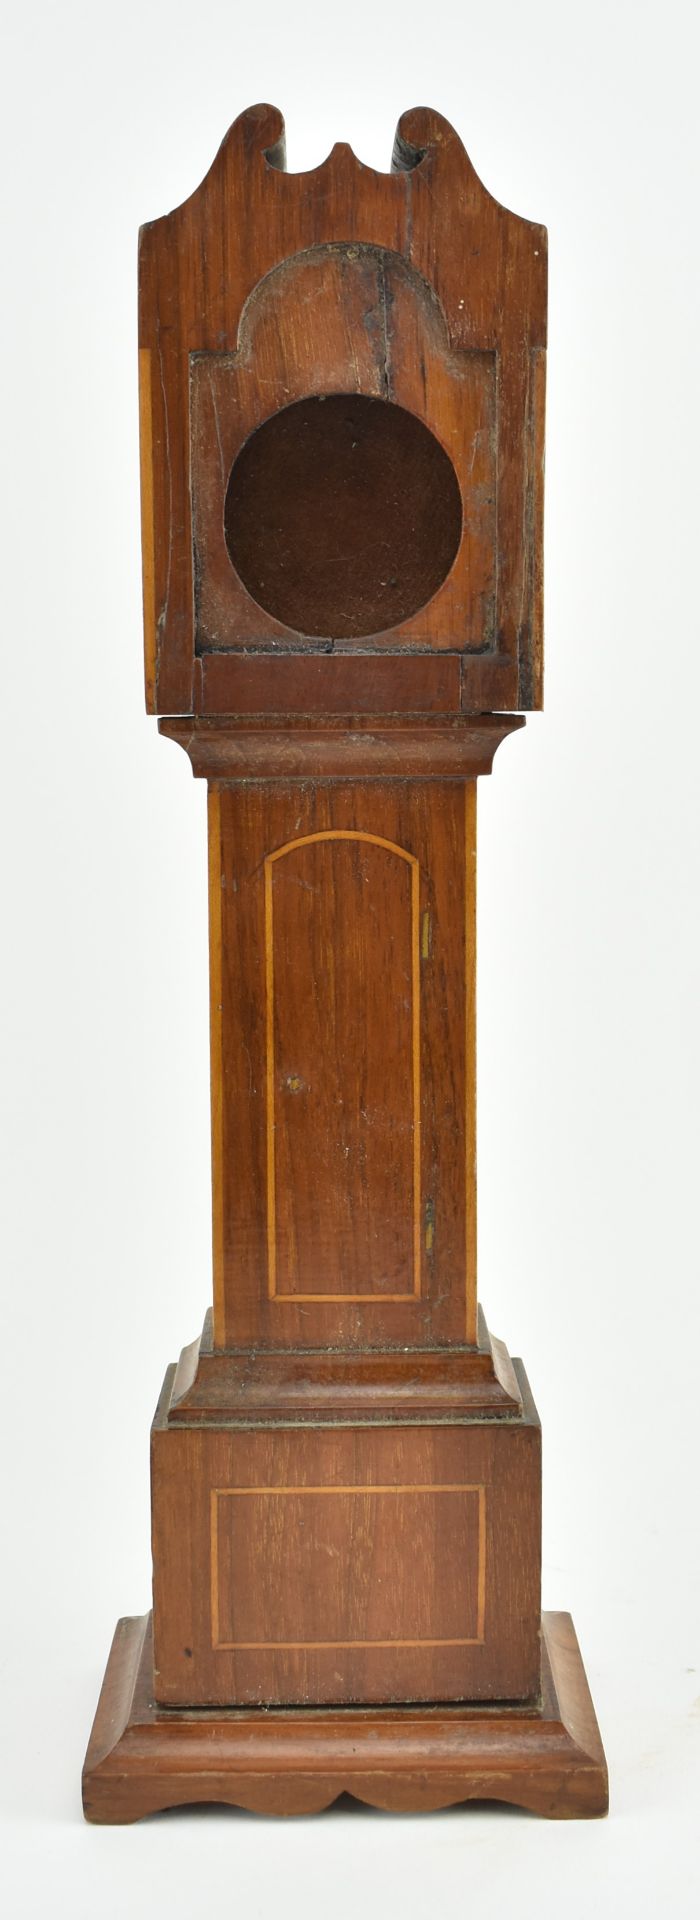 POCKET WATCH HOLDER IN FORM OF GRANDFATHER CLOCK - Image 2 of 9